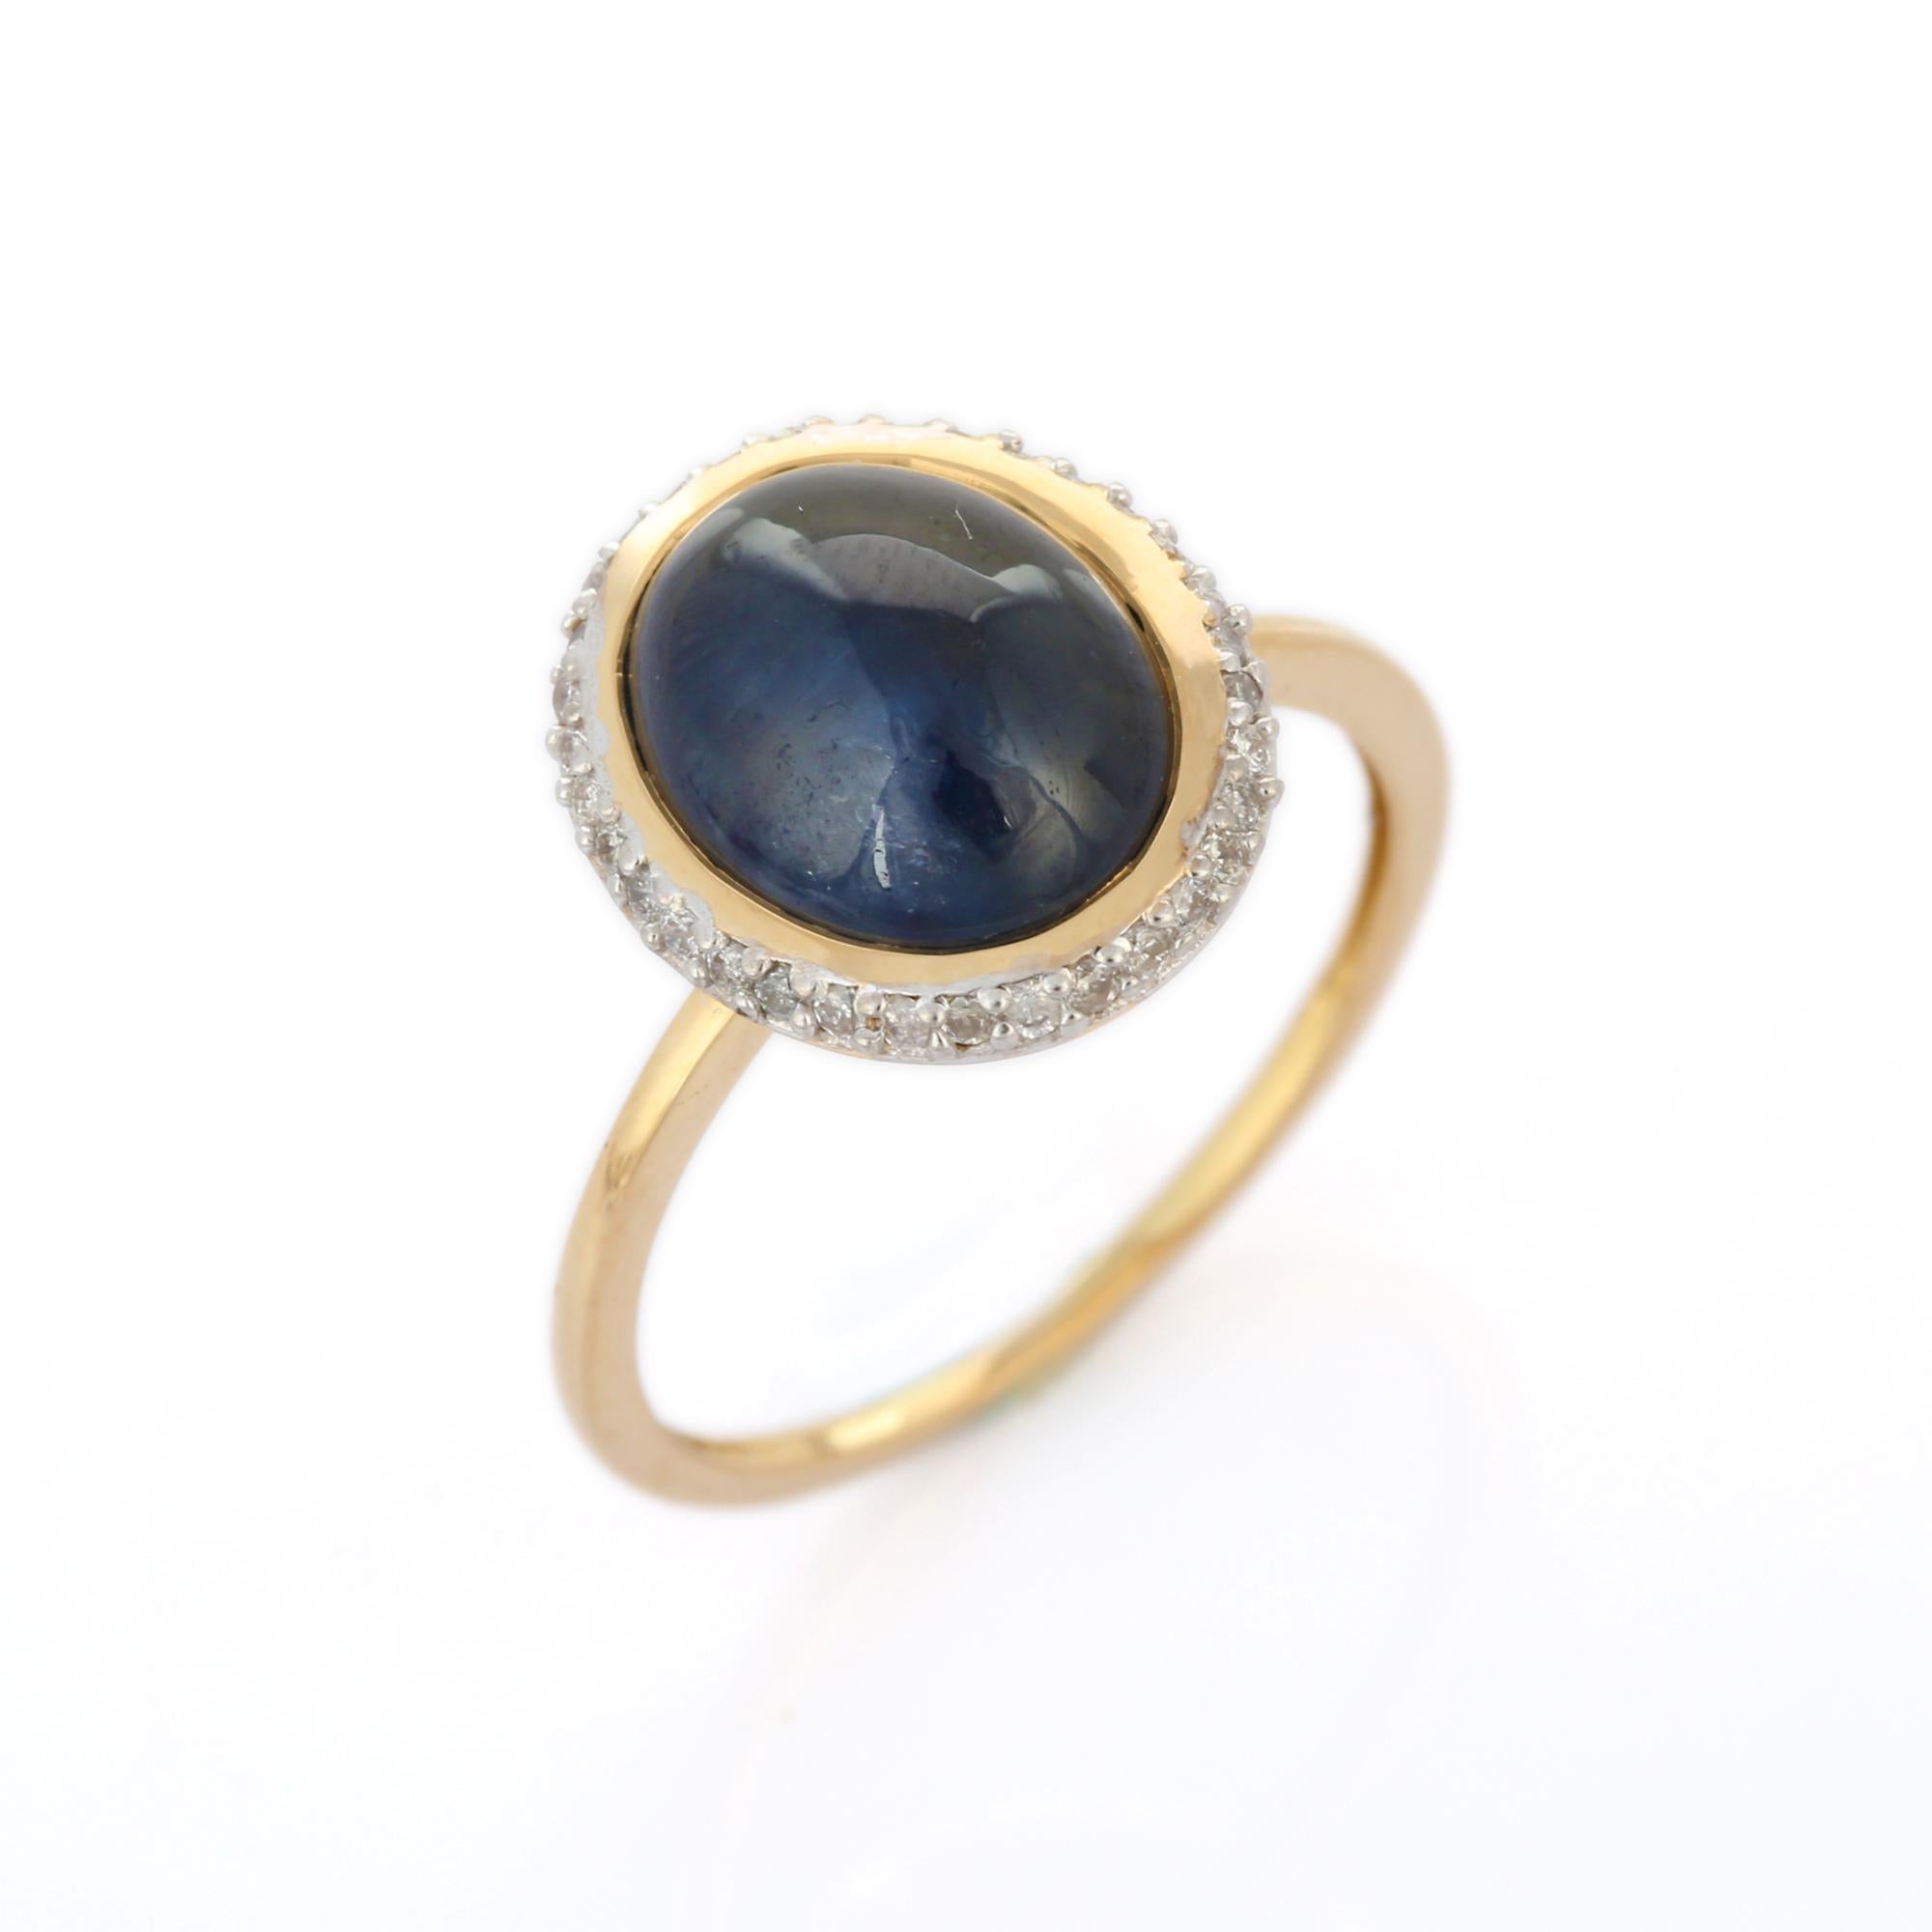 For Sale:  Splendid 4.94 ct Sapphire Diamond Statement Cocktail Ring in 14K Yellow Gold 5